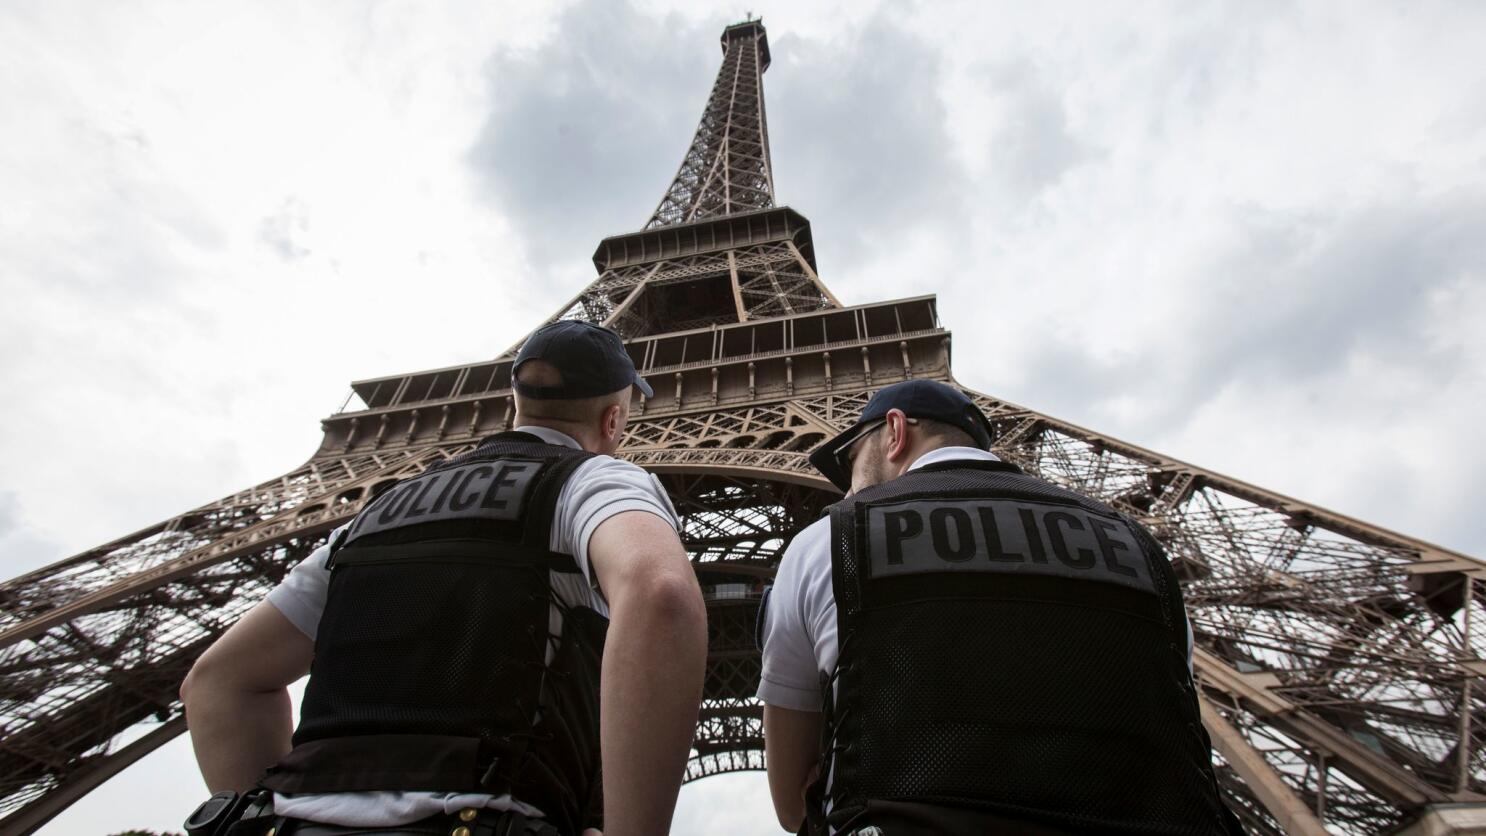 Radicalized Islamist Kills German Tourist and Injured 2 Others in Paris